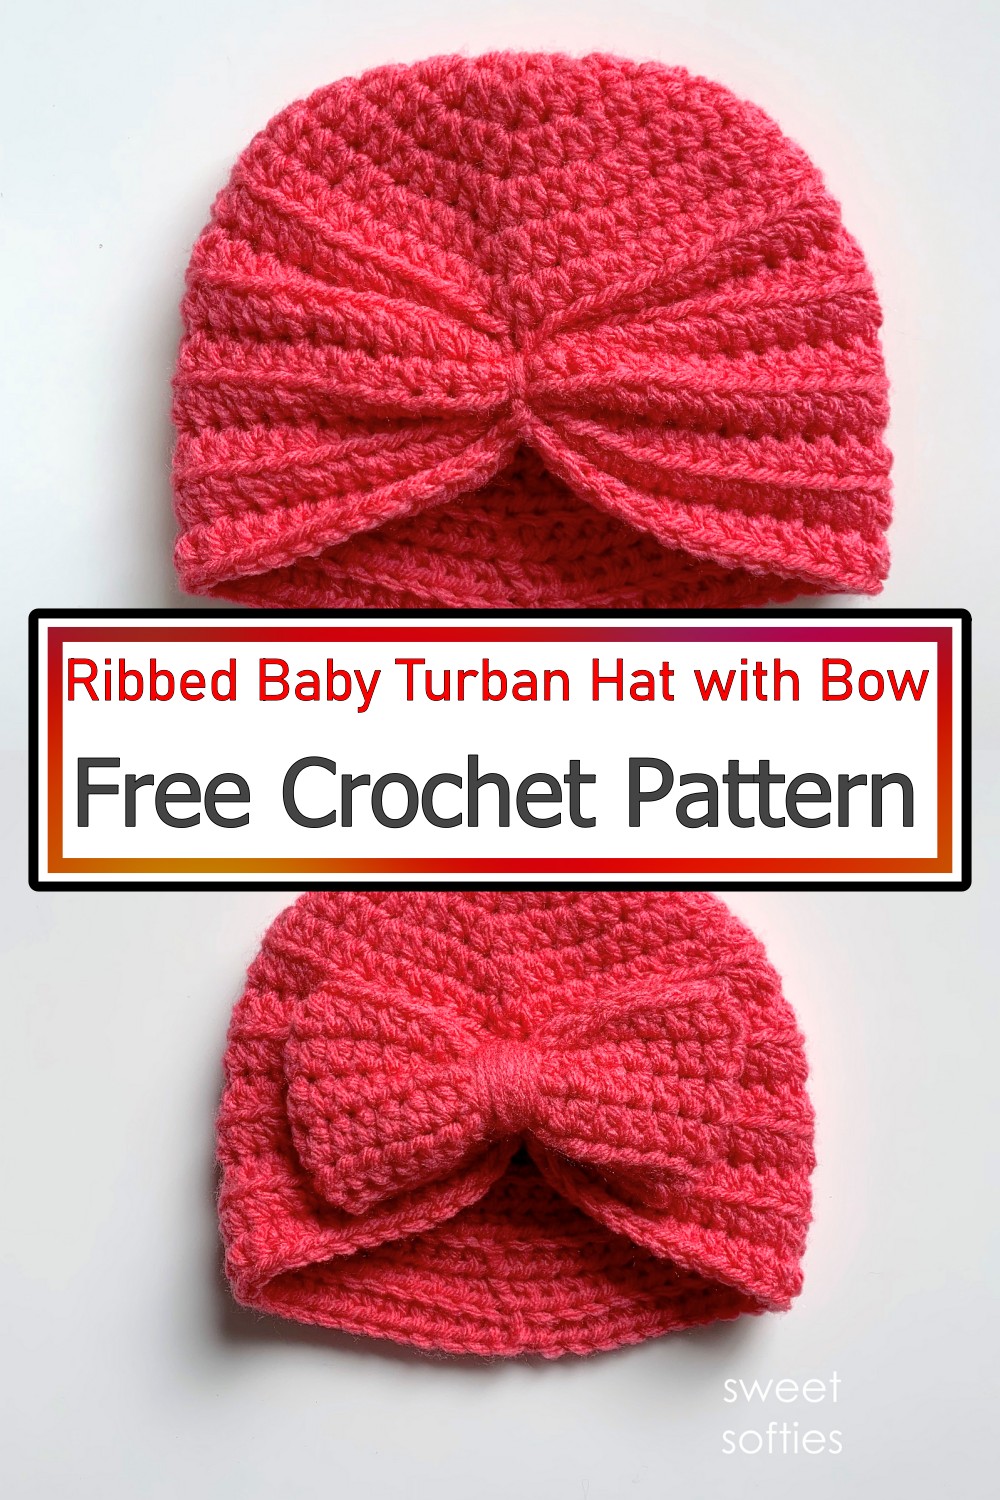 Ribbed Baby Turban Hat with Bow